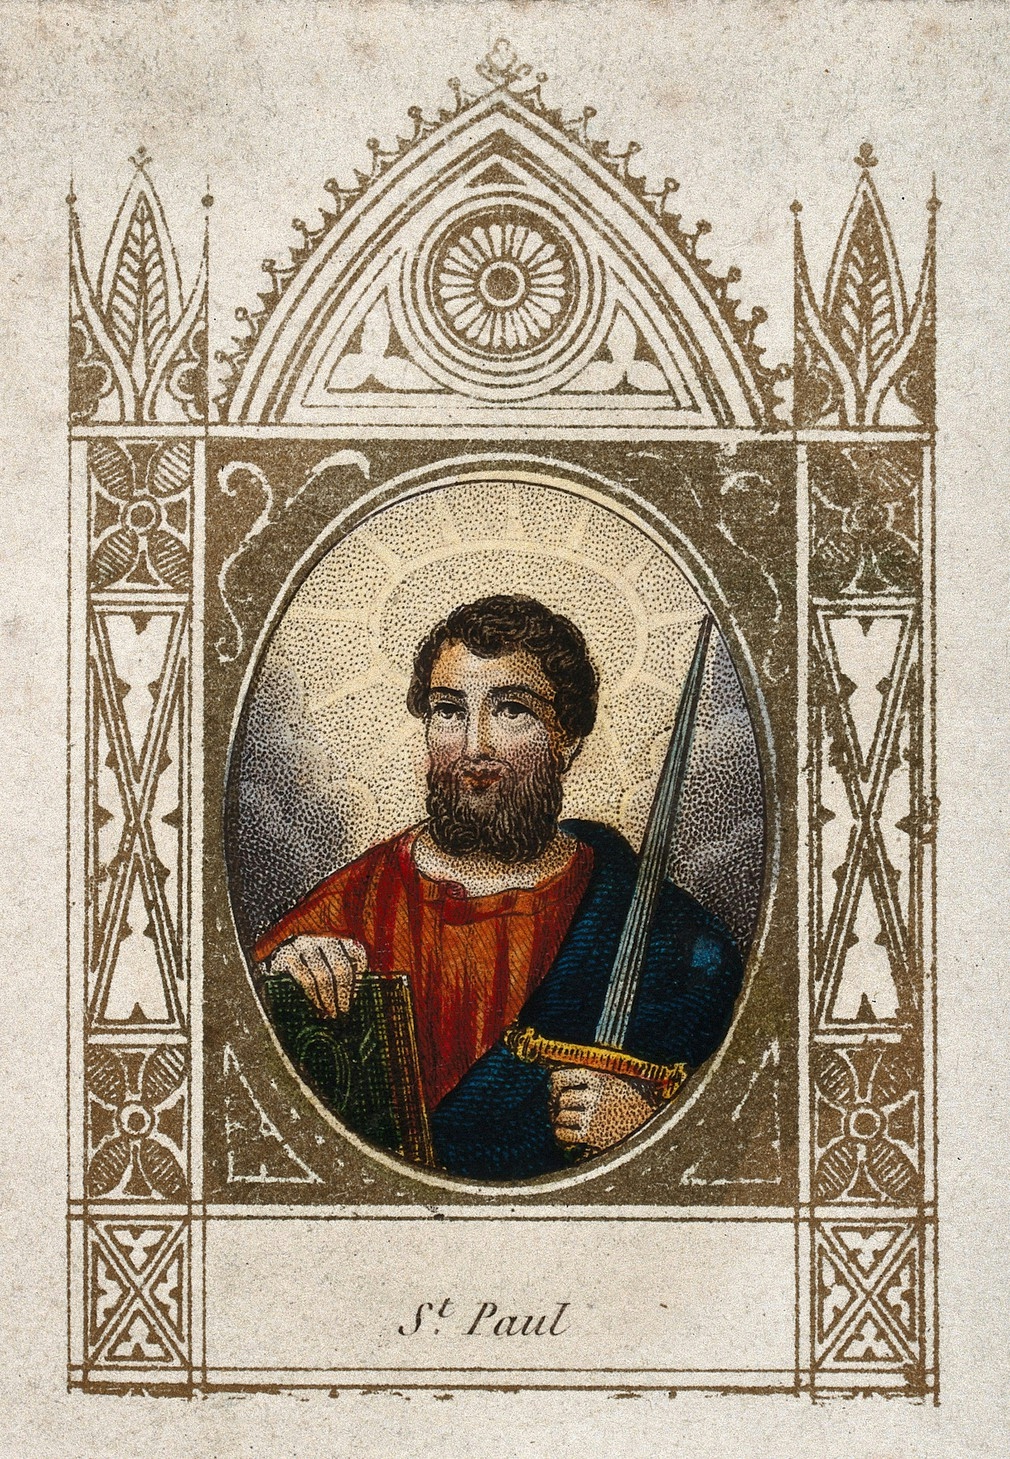 Ornate gold border around image of a bearded man holding a sword and a book.